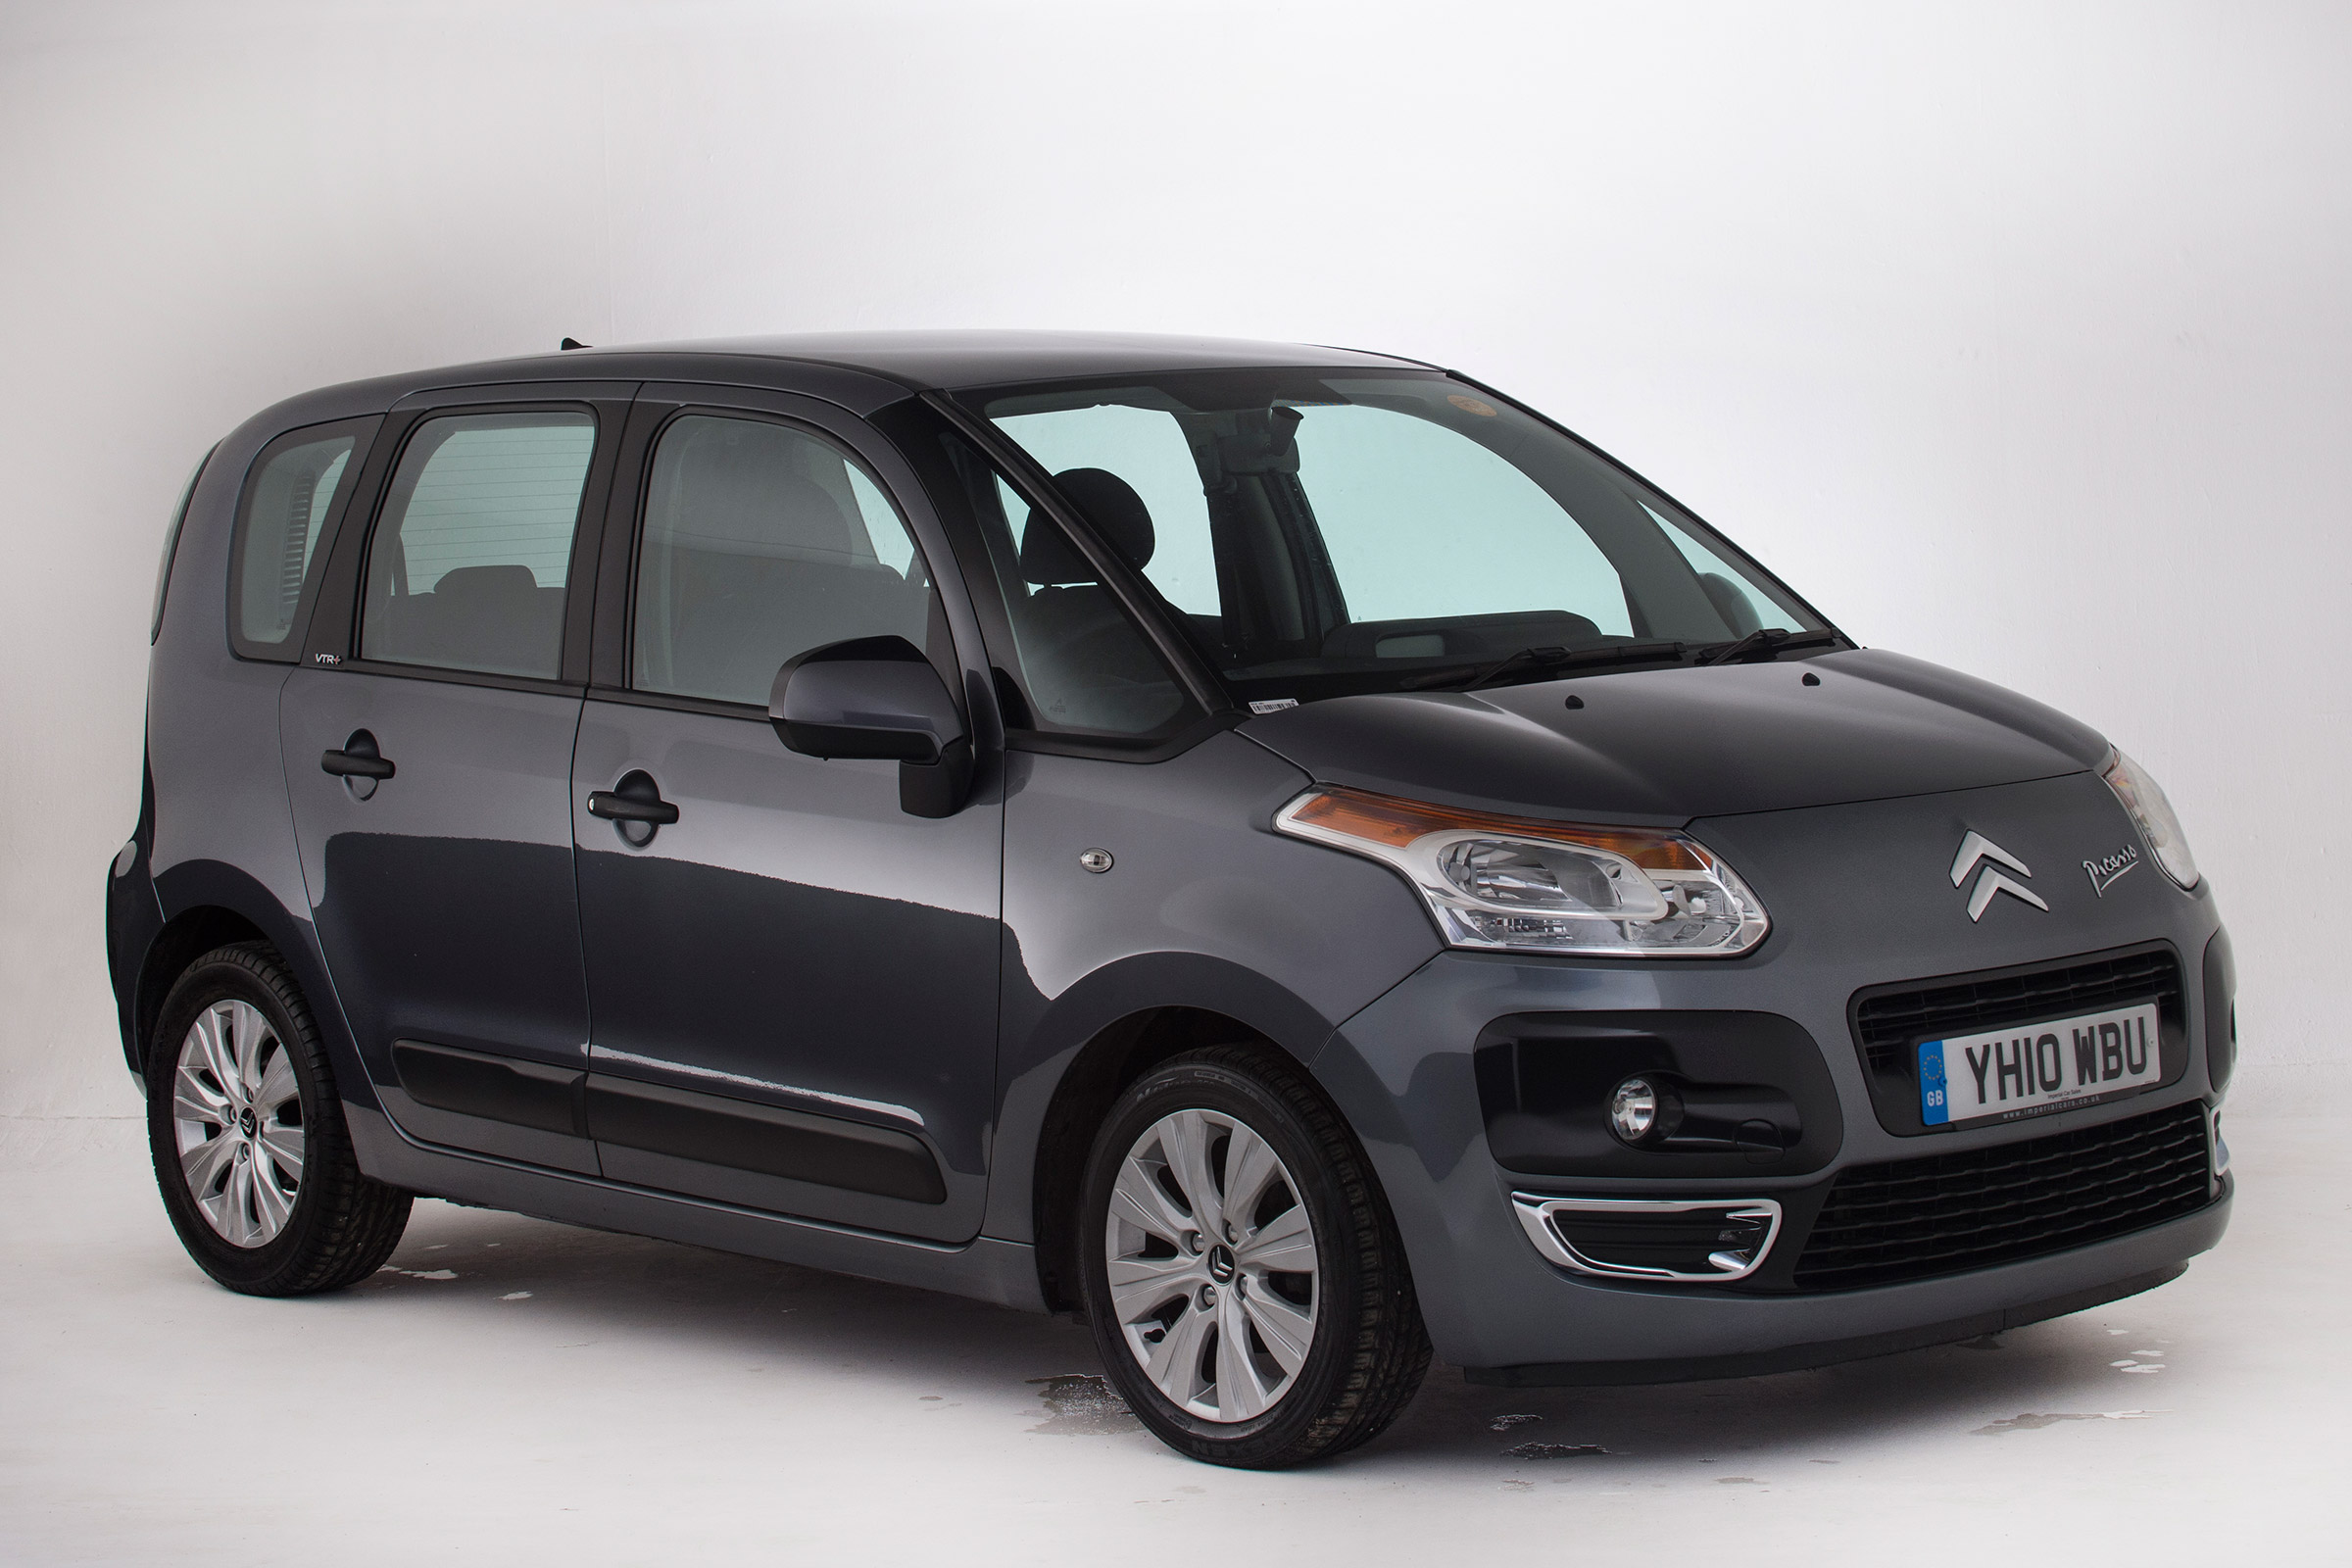 Used Citroen C3 Picasso review Auto Express